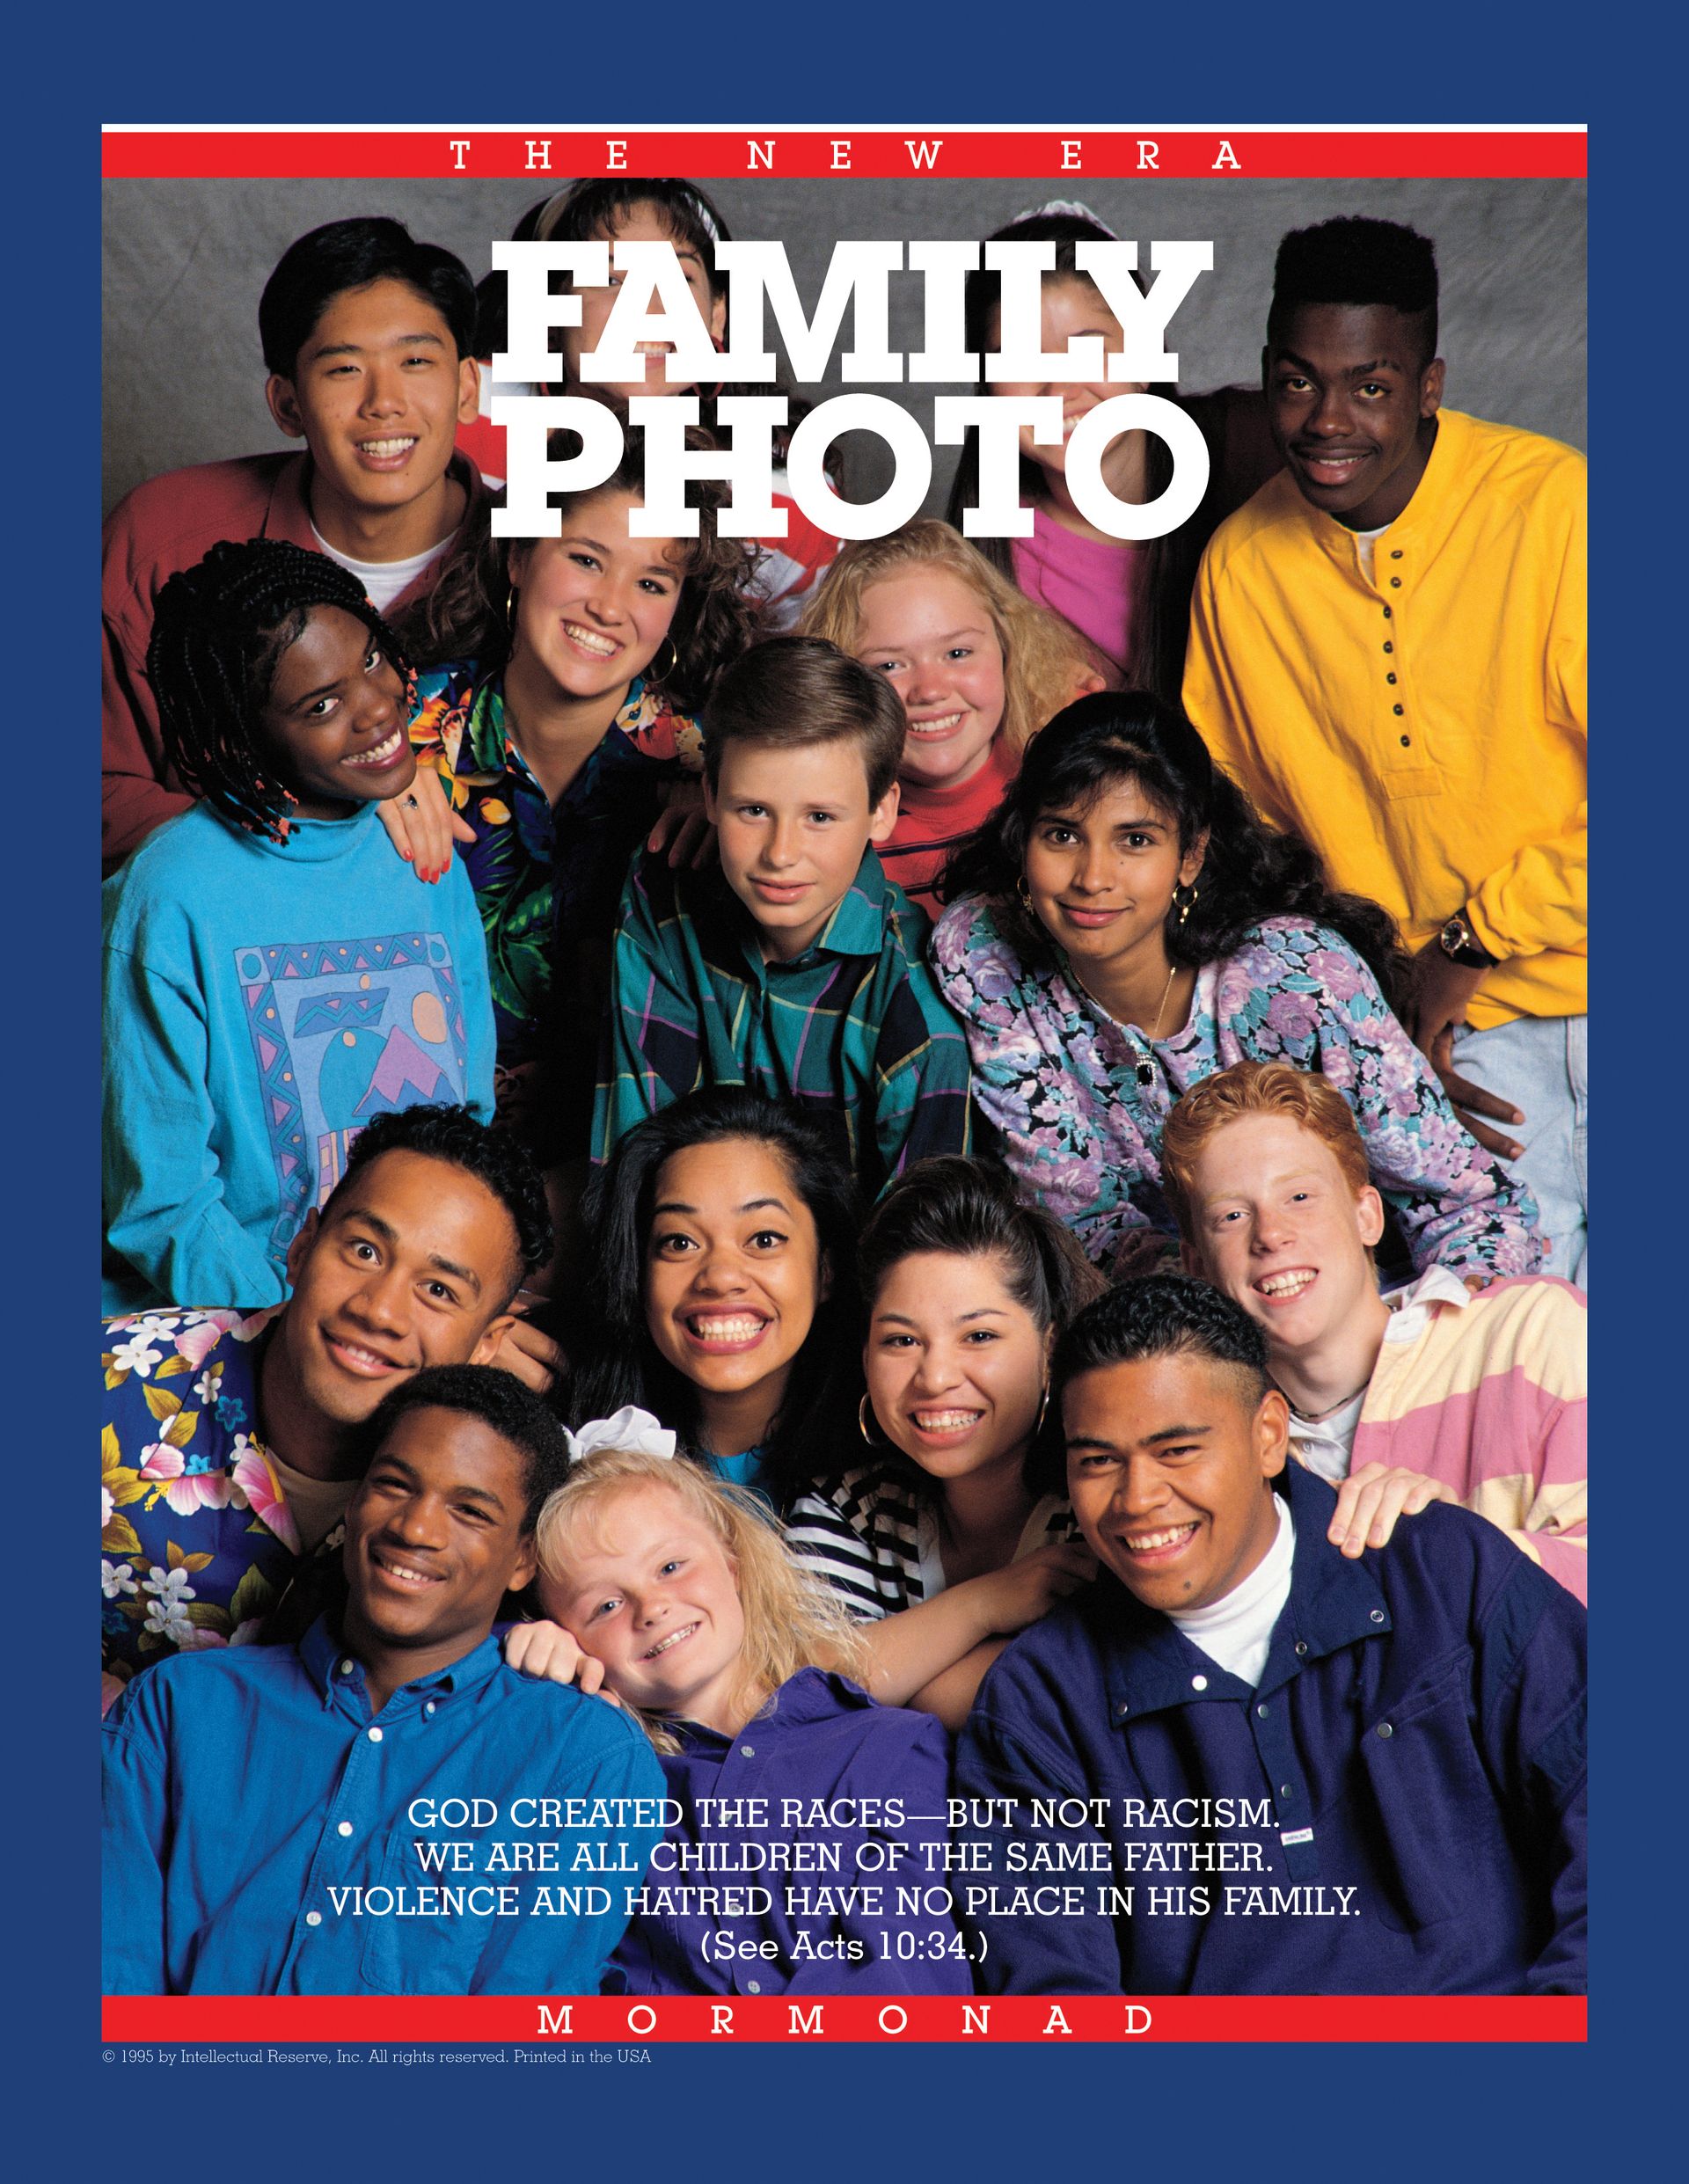 Family Photo. God created the races—but not racism. We are all children of the same Father. Violence and hatred have no place in his family. (See Acts 10:34.) July 1992 © undefined ipCode 1.